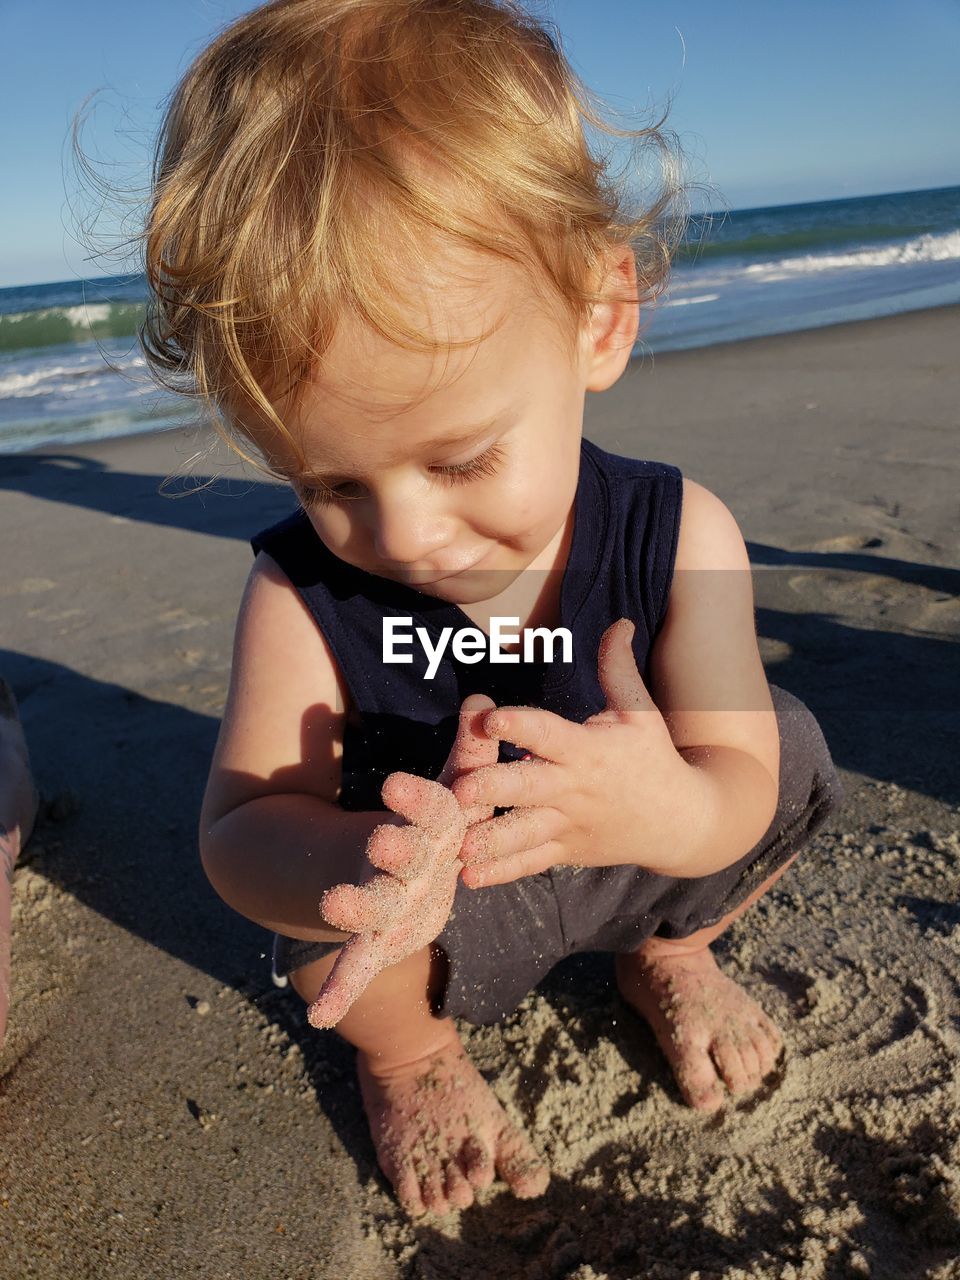 Cute boy playing with sand at beach